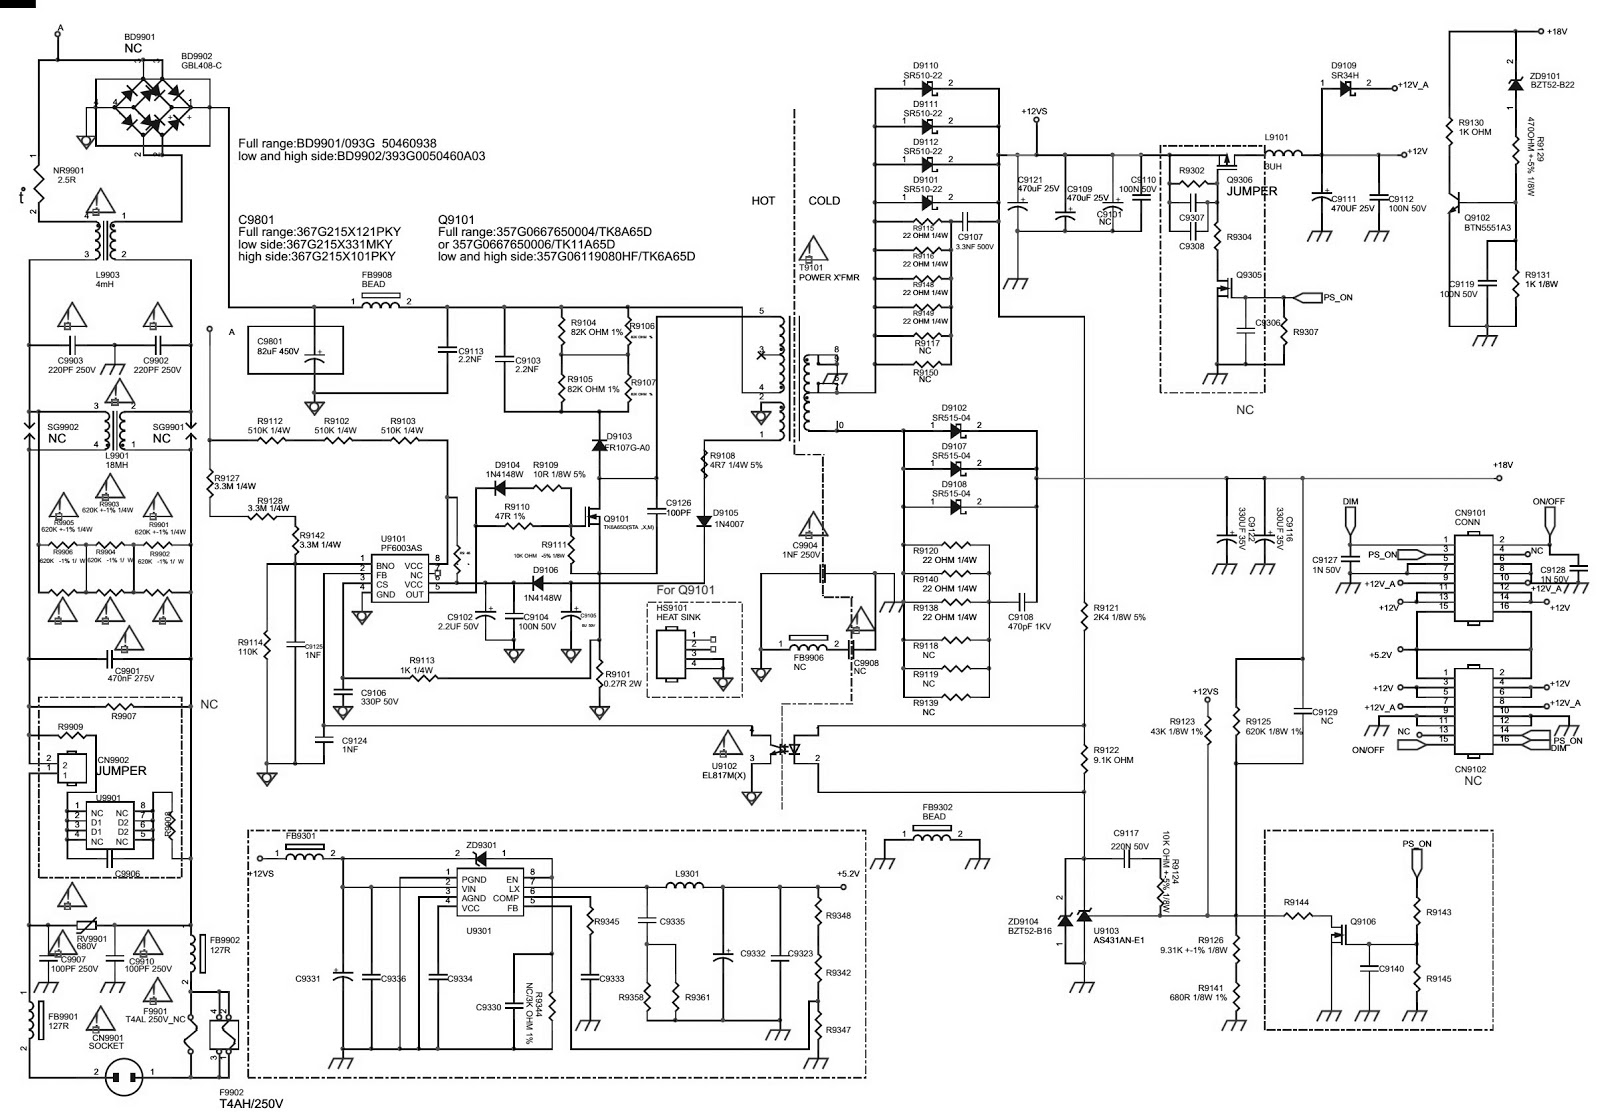 Electro help: Philips LCD TV SMPS Circuit Diagrams